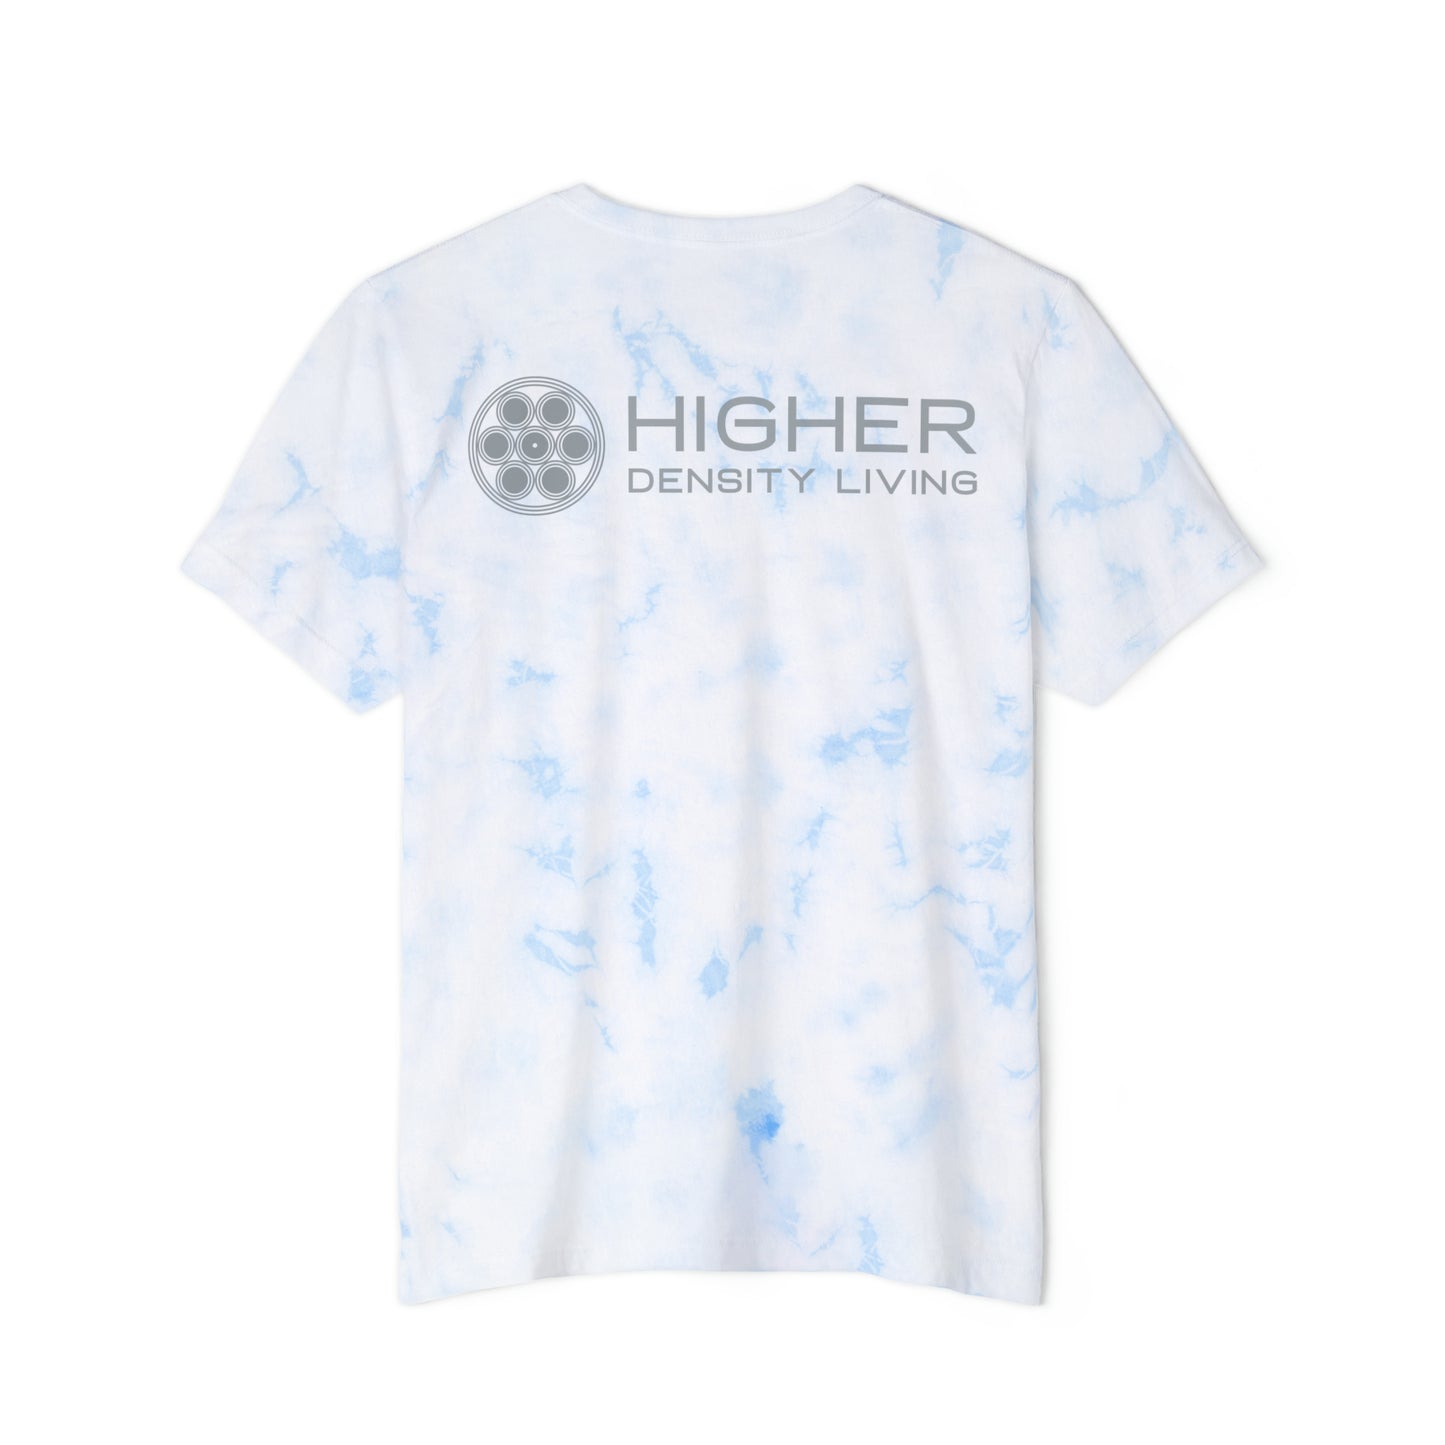 HDL Tie-Dyed T-Shirt: Wear the Spectrum of Higher Density Thinking